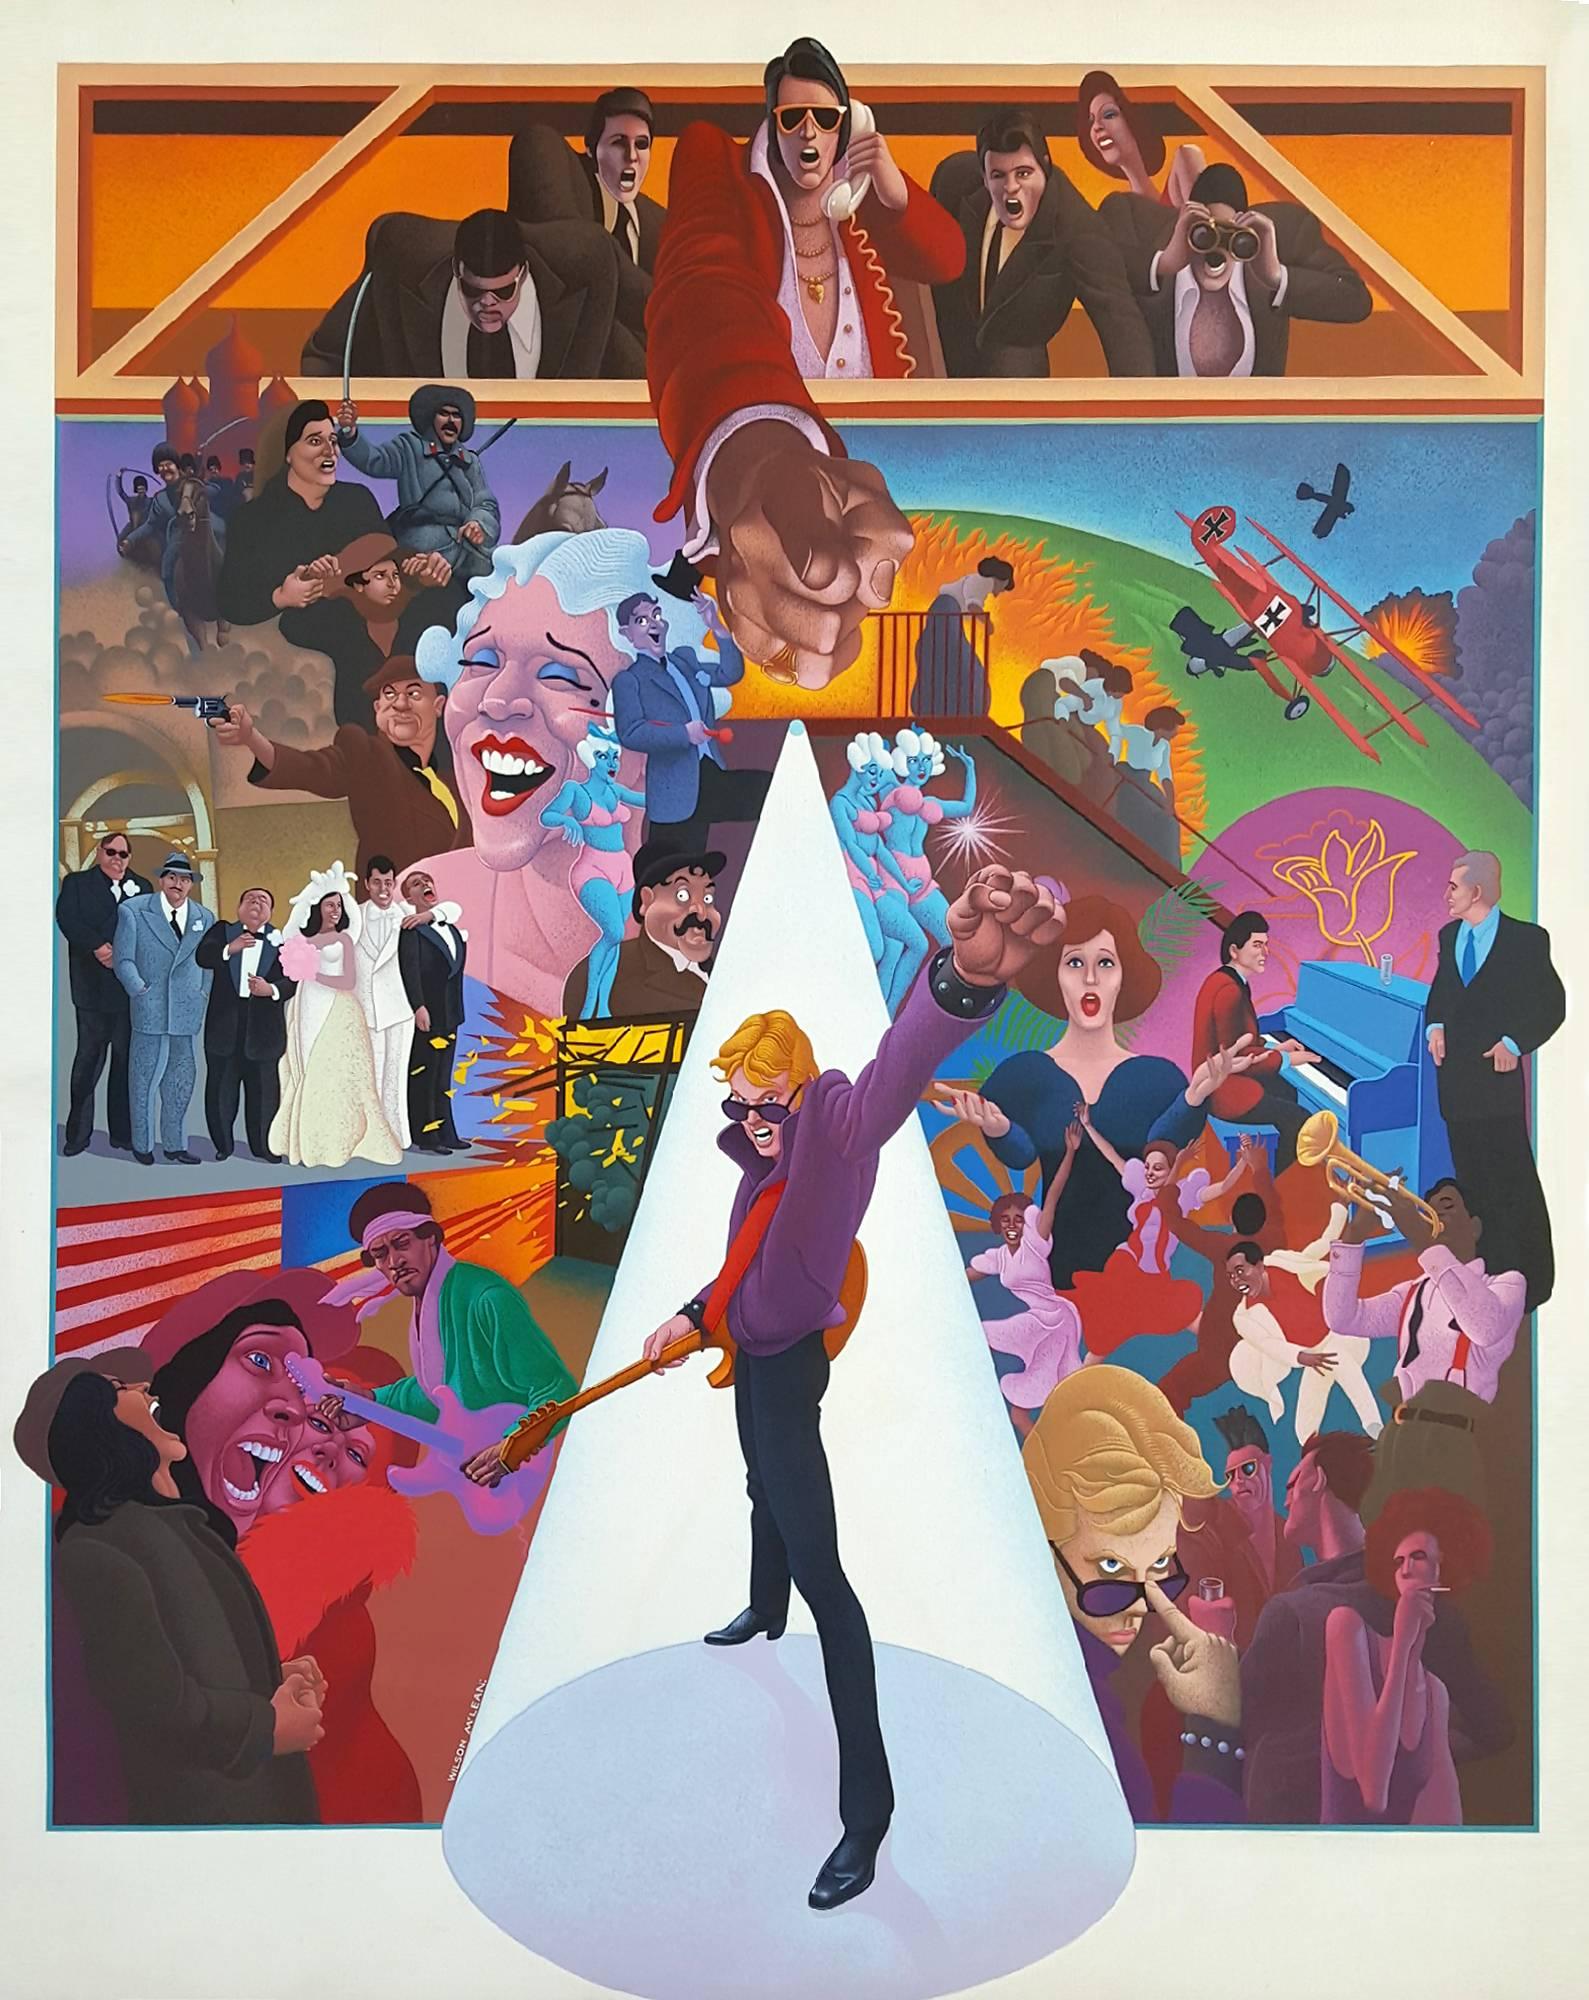 Wilson McLean Figurative Painting - Movie Poster Illustration for "American Pop"